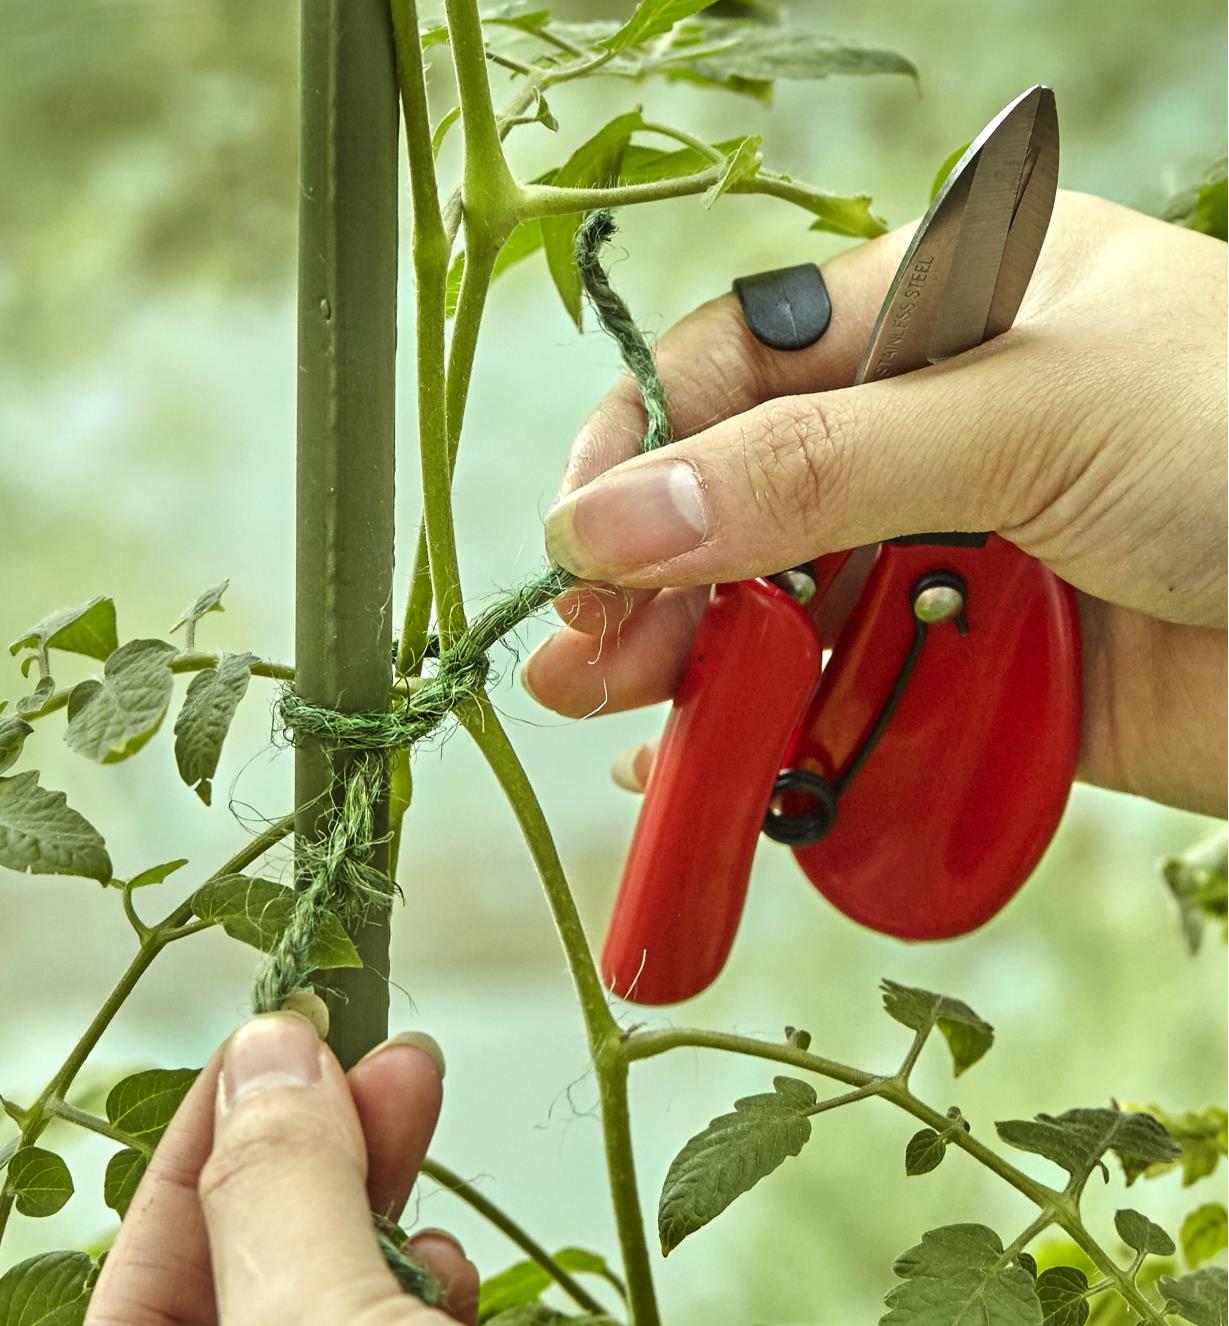 A gardener uses the finger ring to keep the ergonomic snips in hand while securing a plant tie